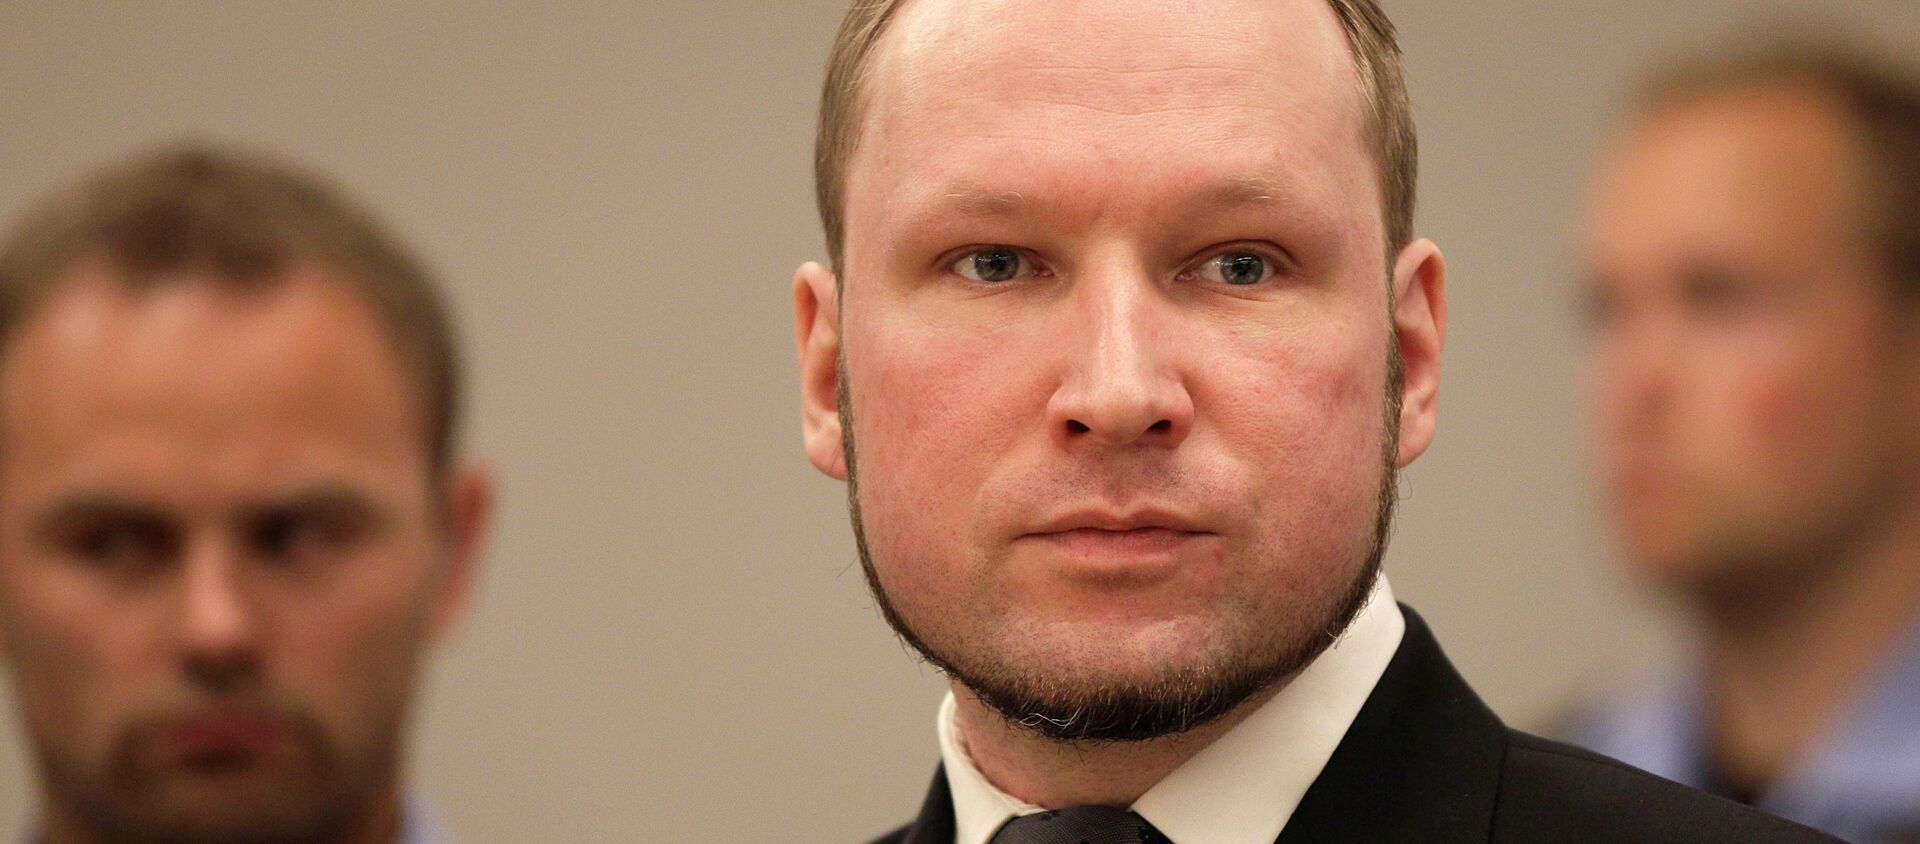 Anders Behring Breivik listens to the judge in the courtroom, Friday, Aug. 24, 2012, in Oslo, Norway - Sputnik International, 1920, 22.07.2021